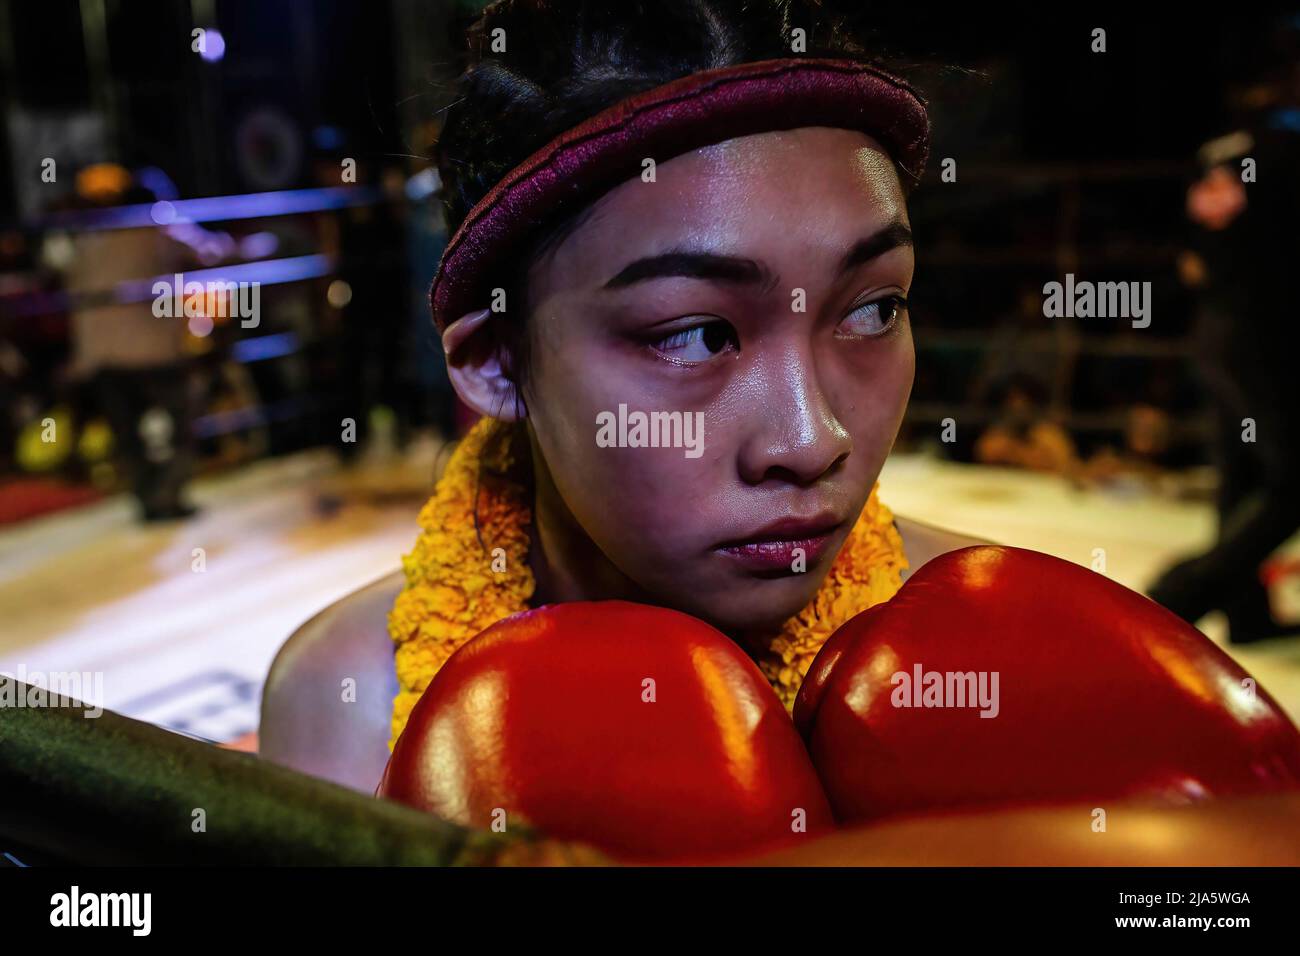 Nutthaya Namongkol, better known as Peem, prepares herself in the corner of the boxing ring before the beginning of a fight in an all-female Muay Thai tournament. Years ago seeing women in a ring fighting (Muay Thai) in Thailand was almost unheard of, unless it was in a ceremonial fight in the local temple during the festive season. Nowadays, things are changing and more women are joining the sport. The city of Chiang Mai is the epicentre of this change with the support of a local promoter that sees the sport as a way to promote equality, and the growing interest in the sport by foreigners flo Stock Photo